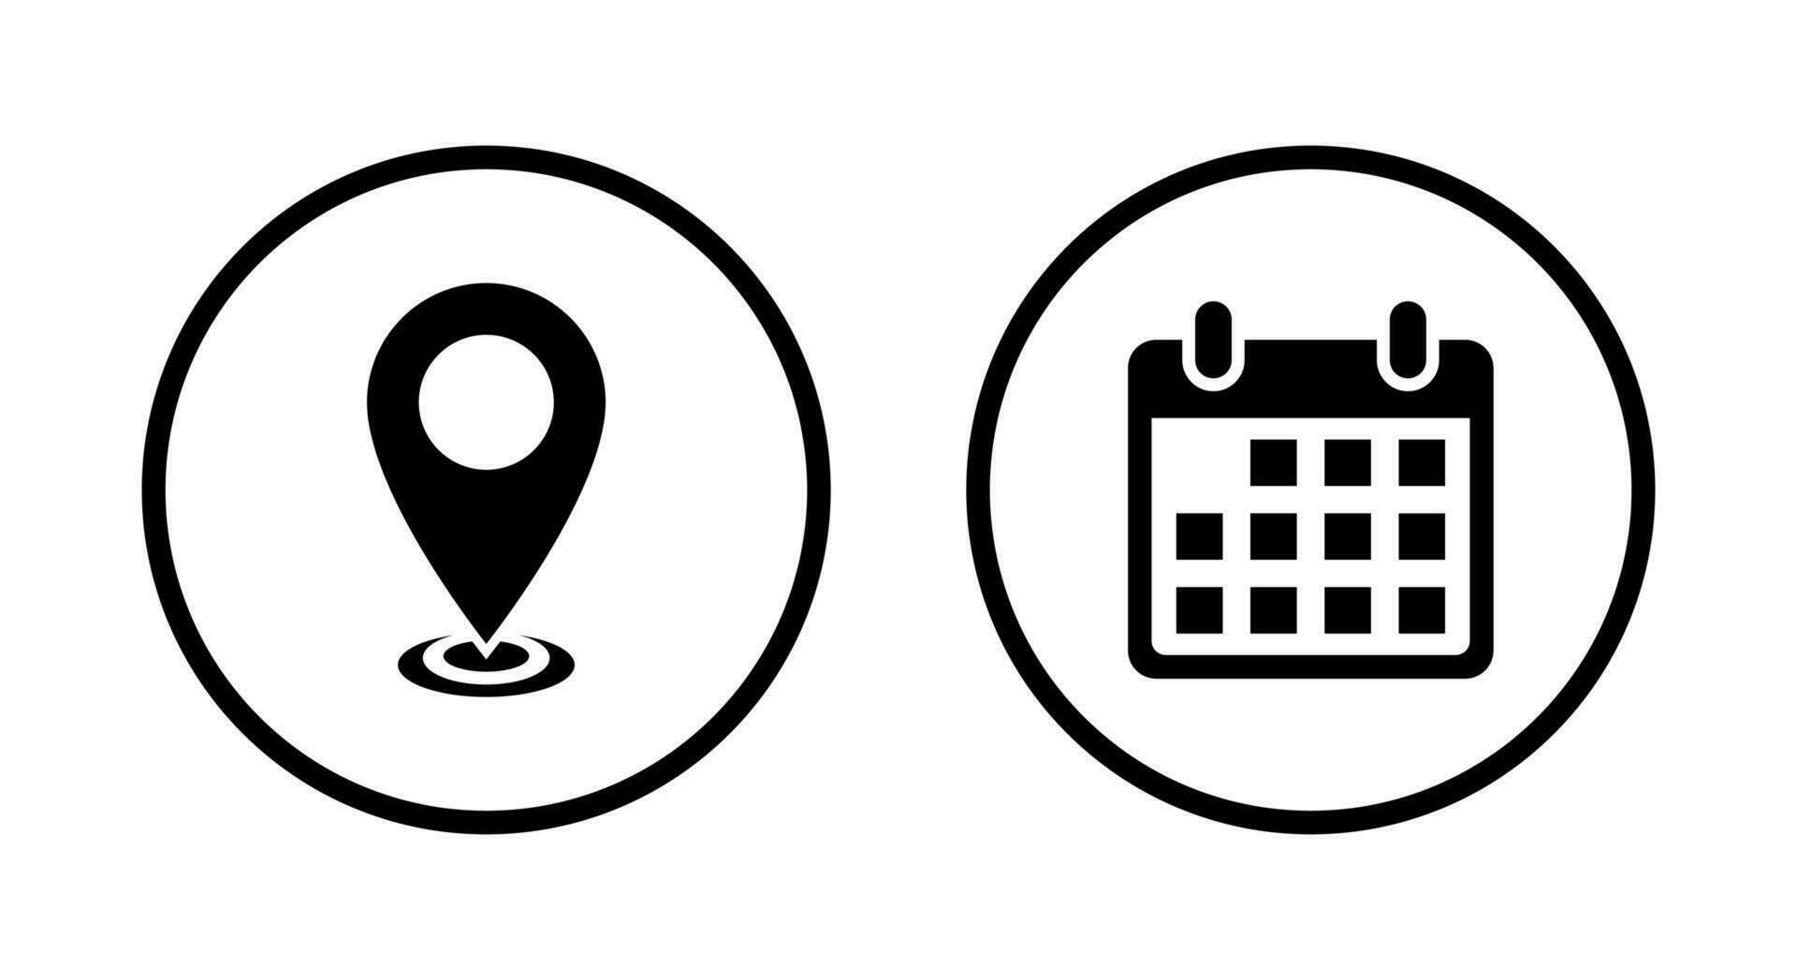 Location and calendar icon vector in circle line. Map pin and schedule date sign symbol